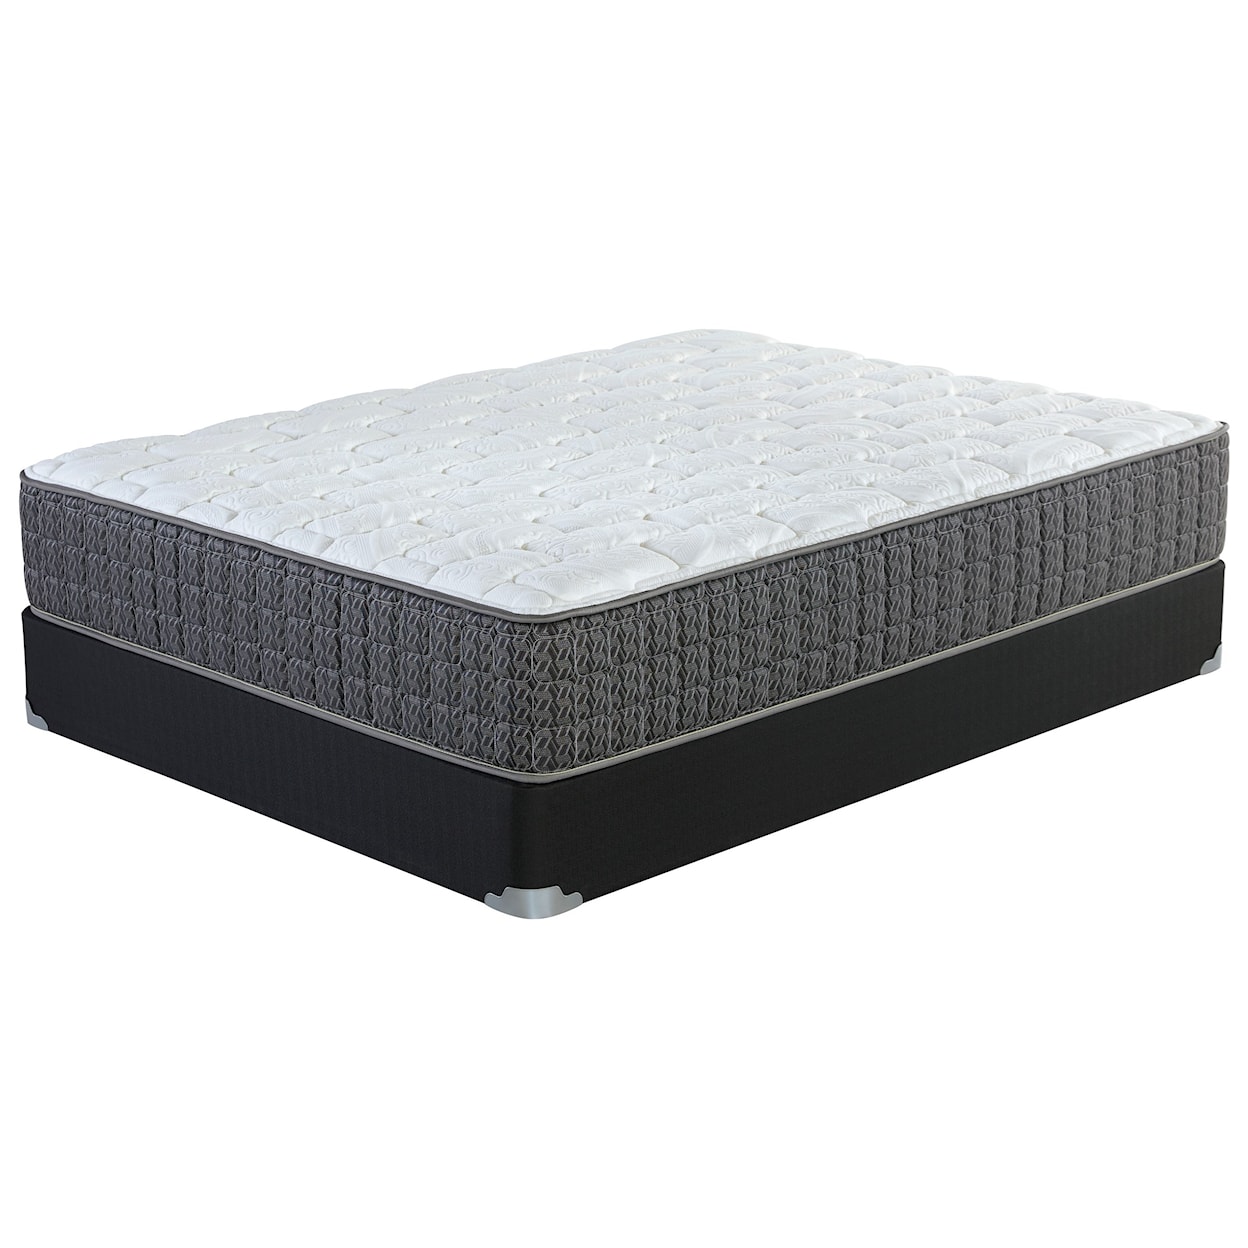 Corsicana Kinley Firm Cal King Firm Pocketed Coil Mattress Set